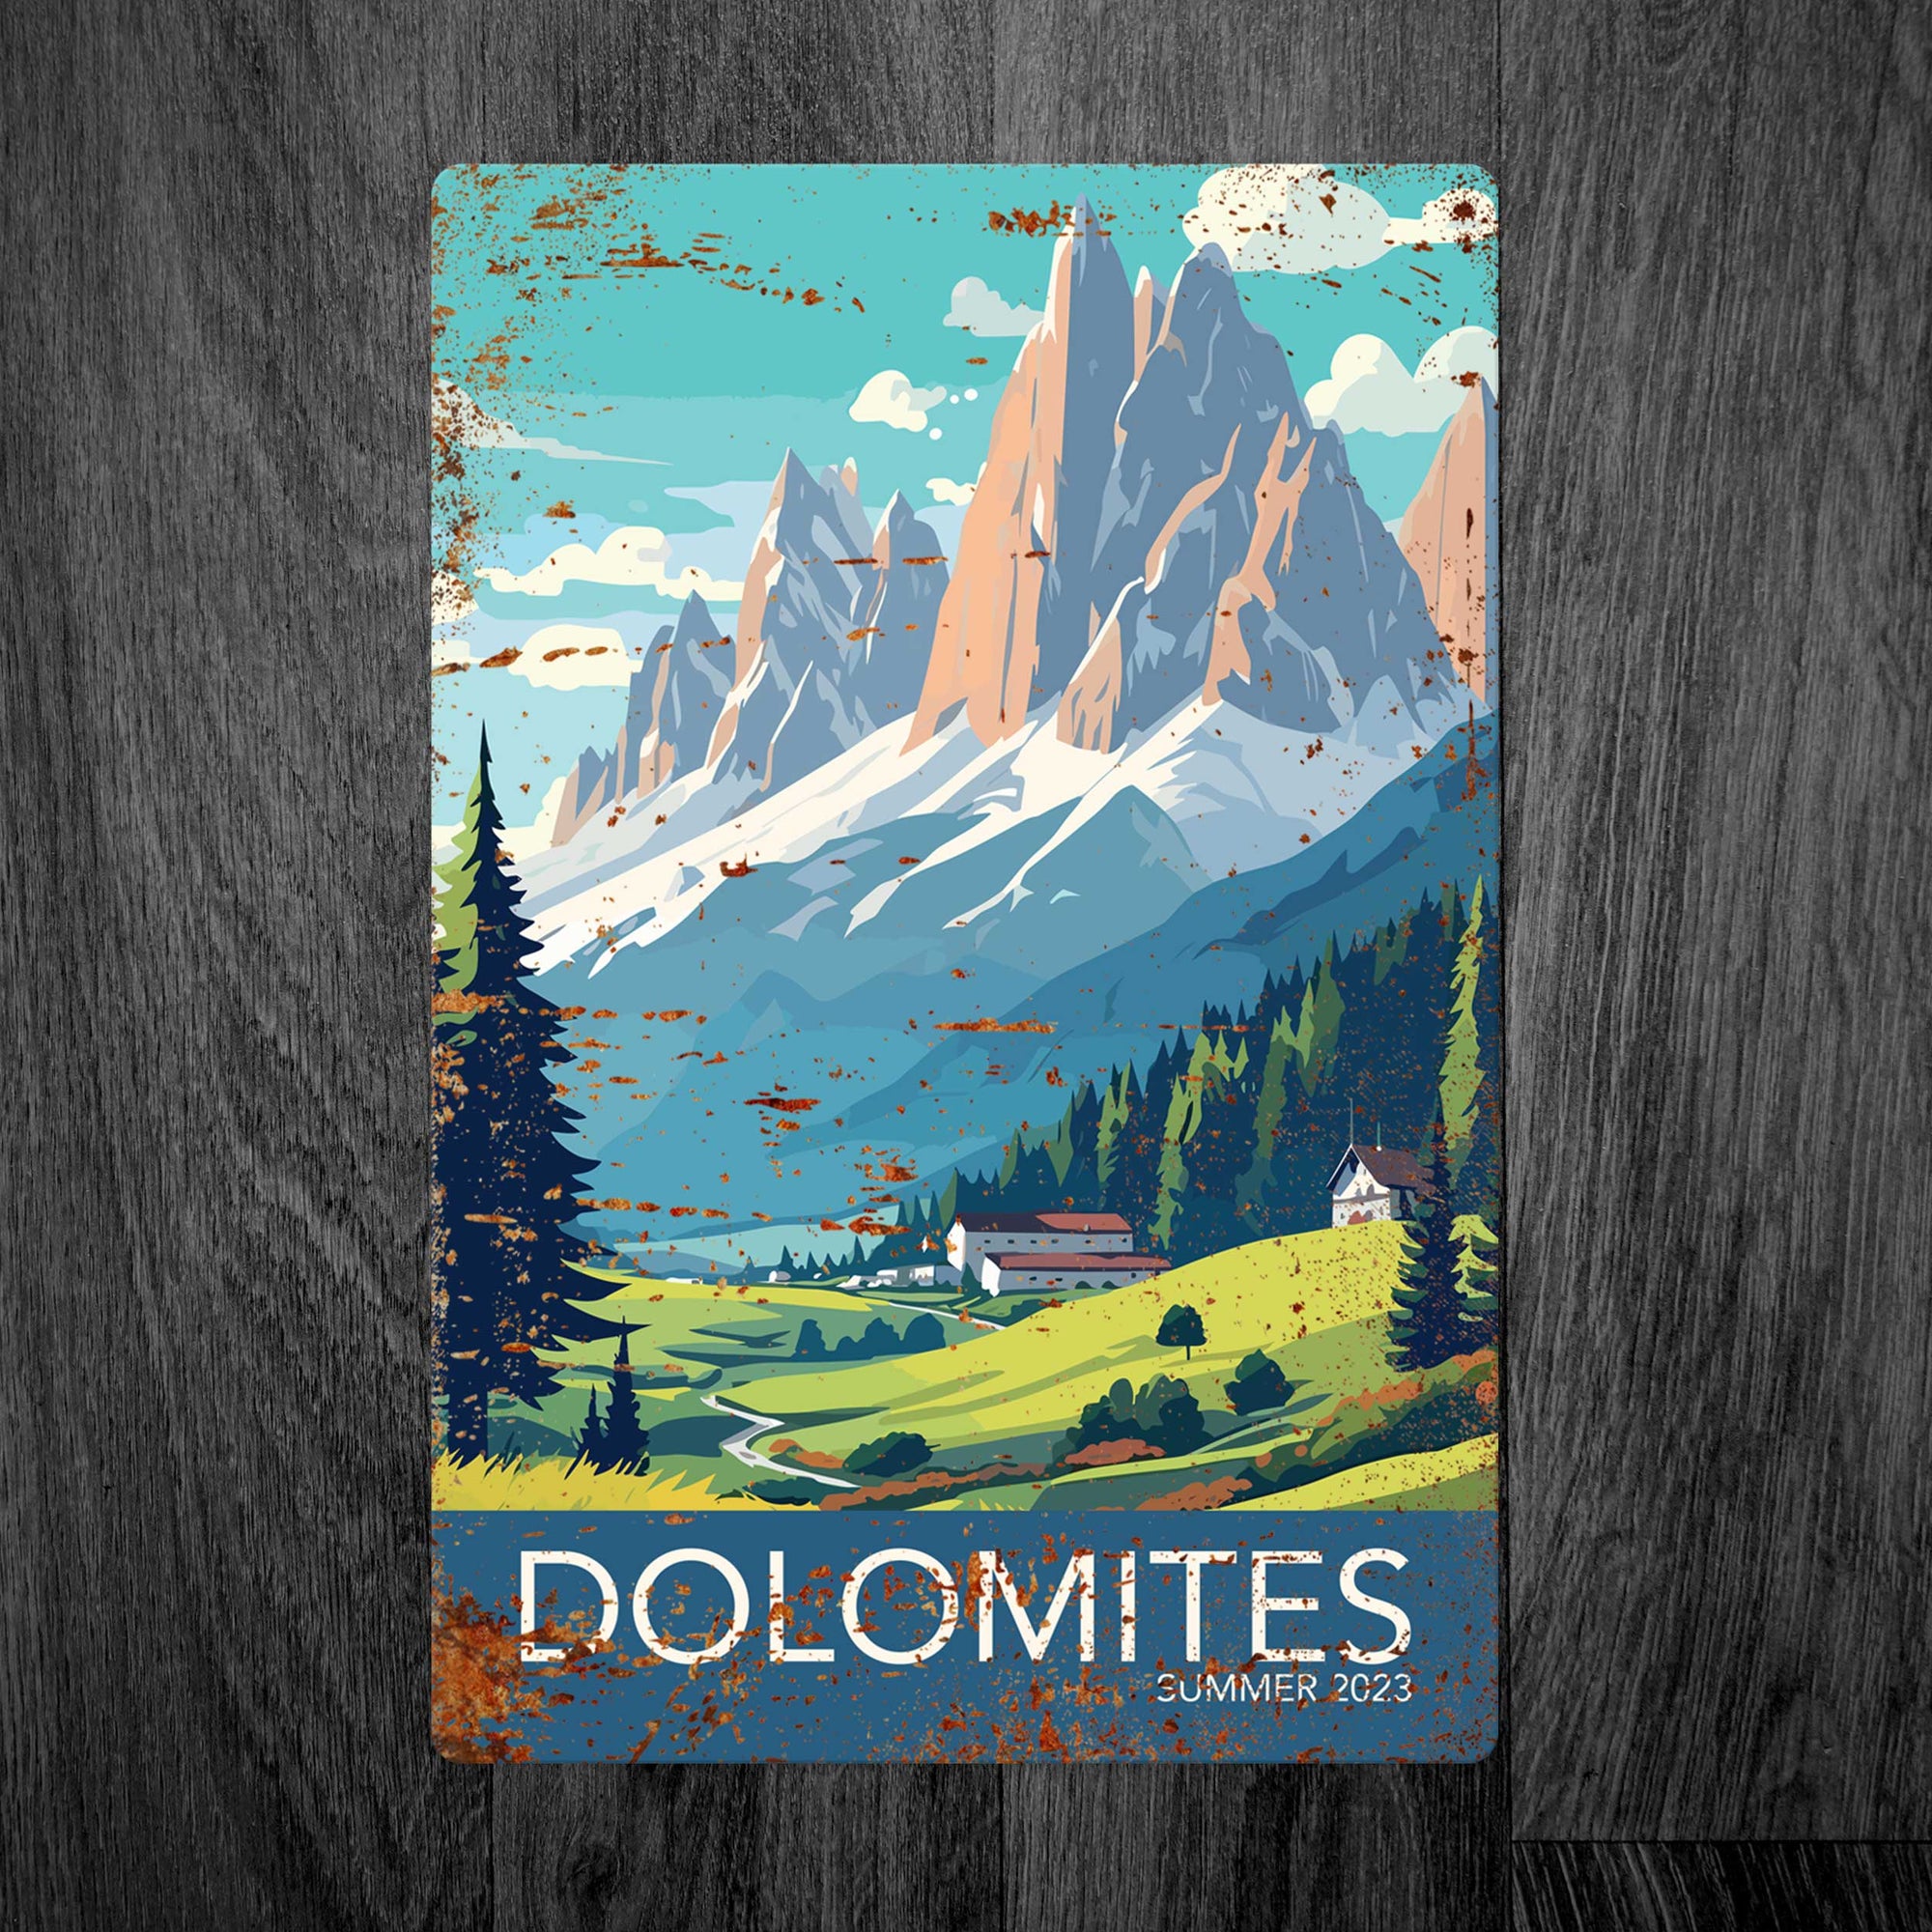 Personalised Metal Travel Sign: Capture the Majestic Dolomites Mountains and Valley